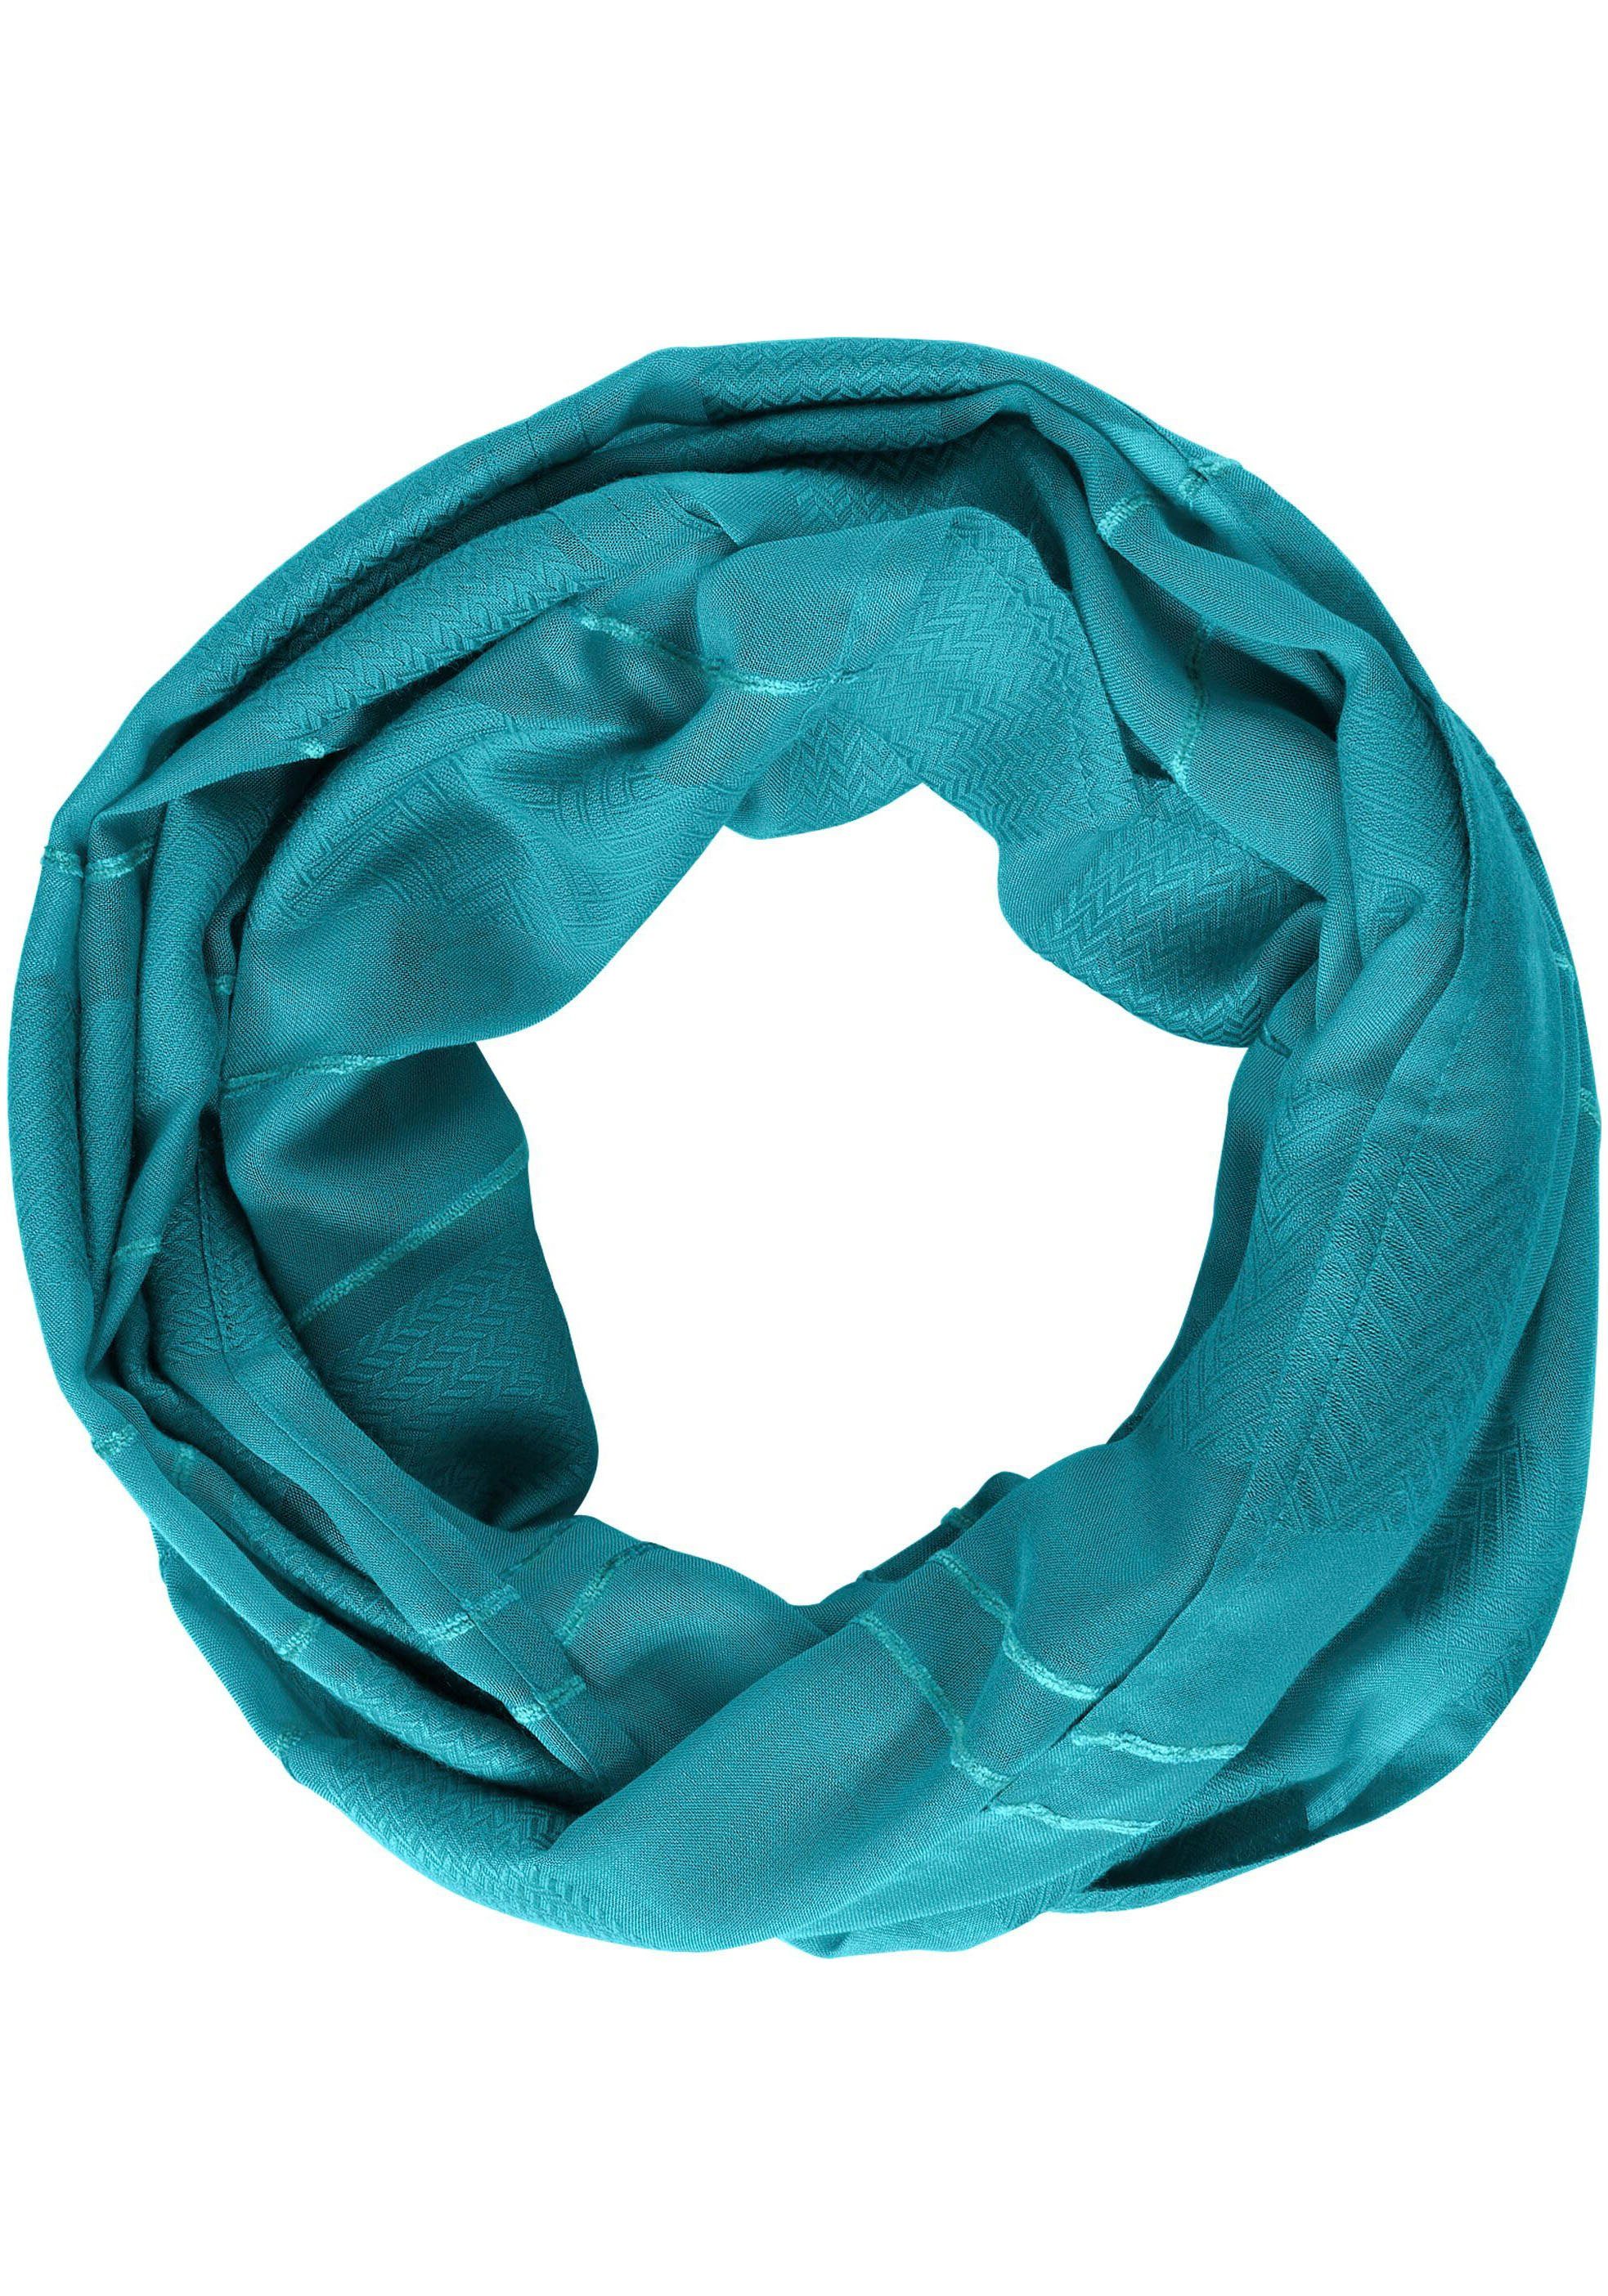 blue mit Loop, frosted aqua Fischgratmuster Cecil